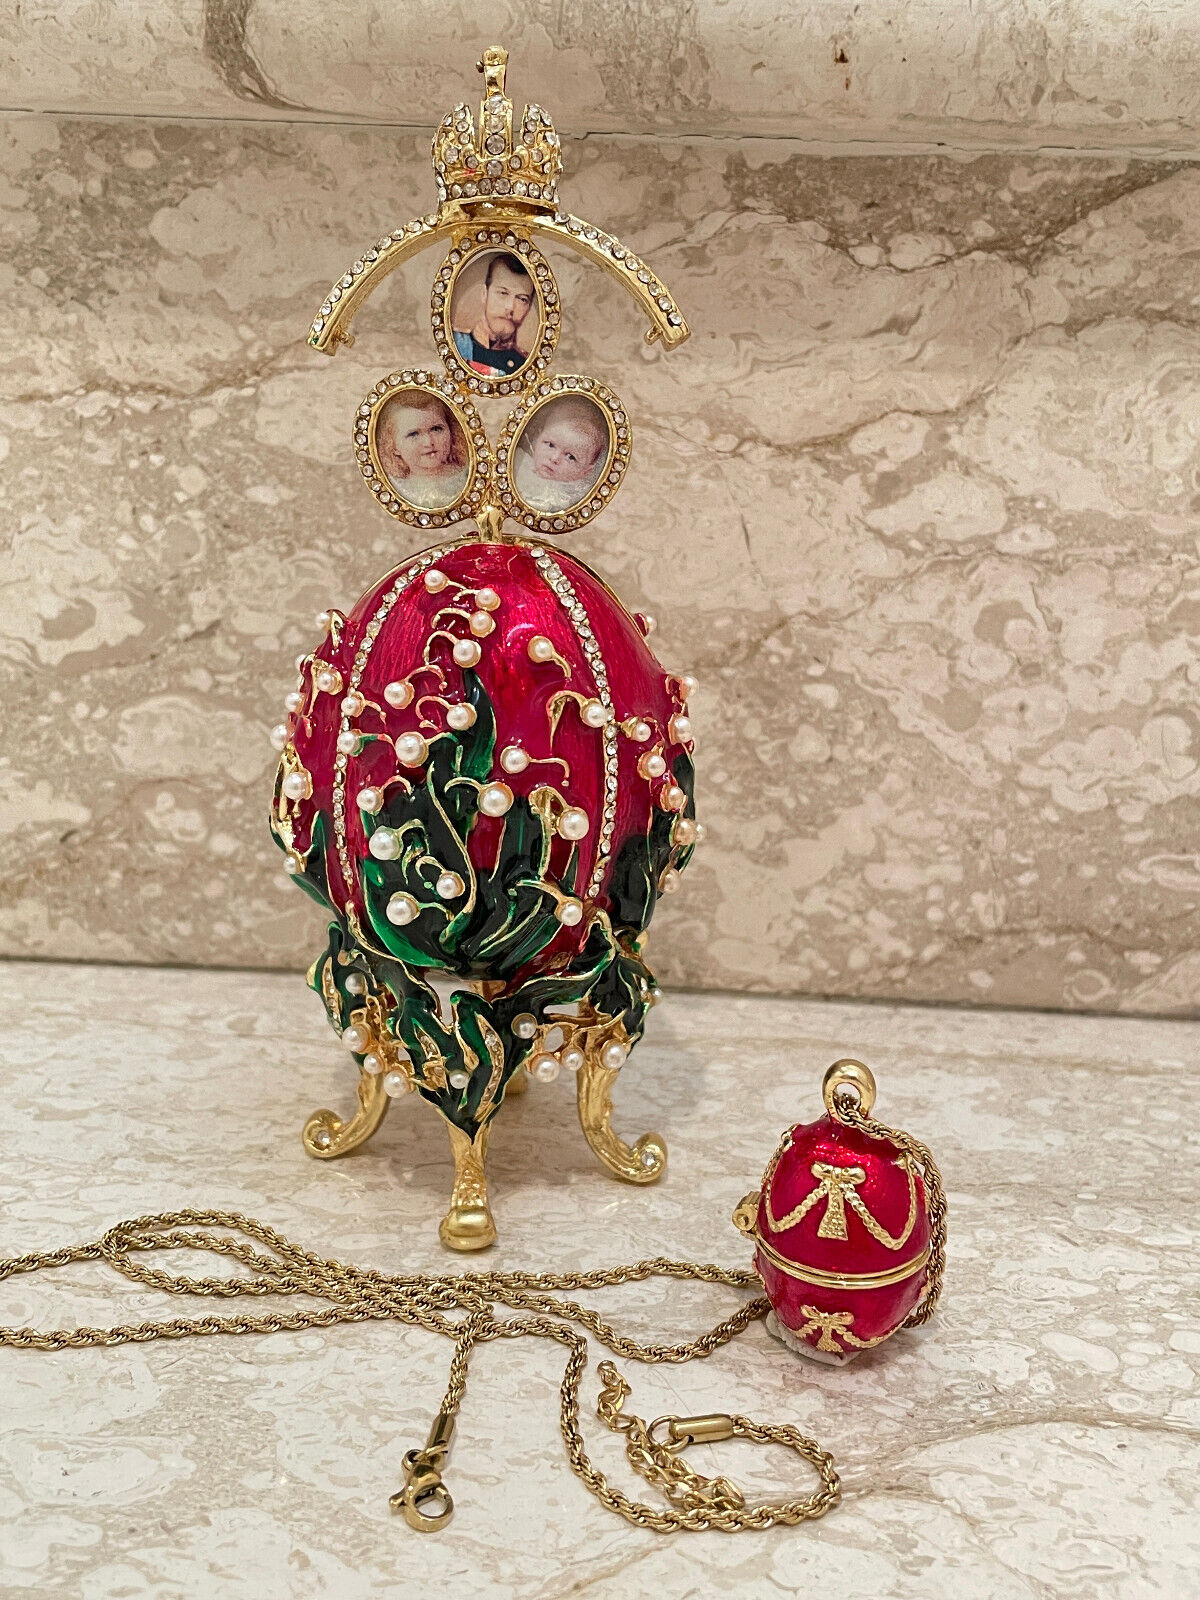 Royal Imperial Faberge Egg 1898 & FabergeNecklace